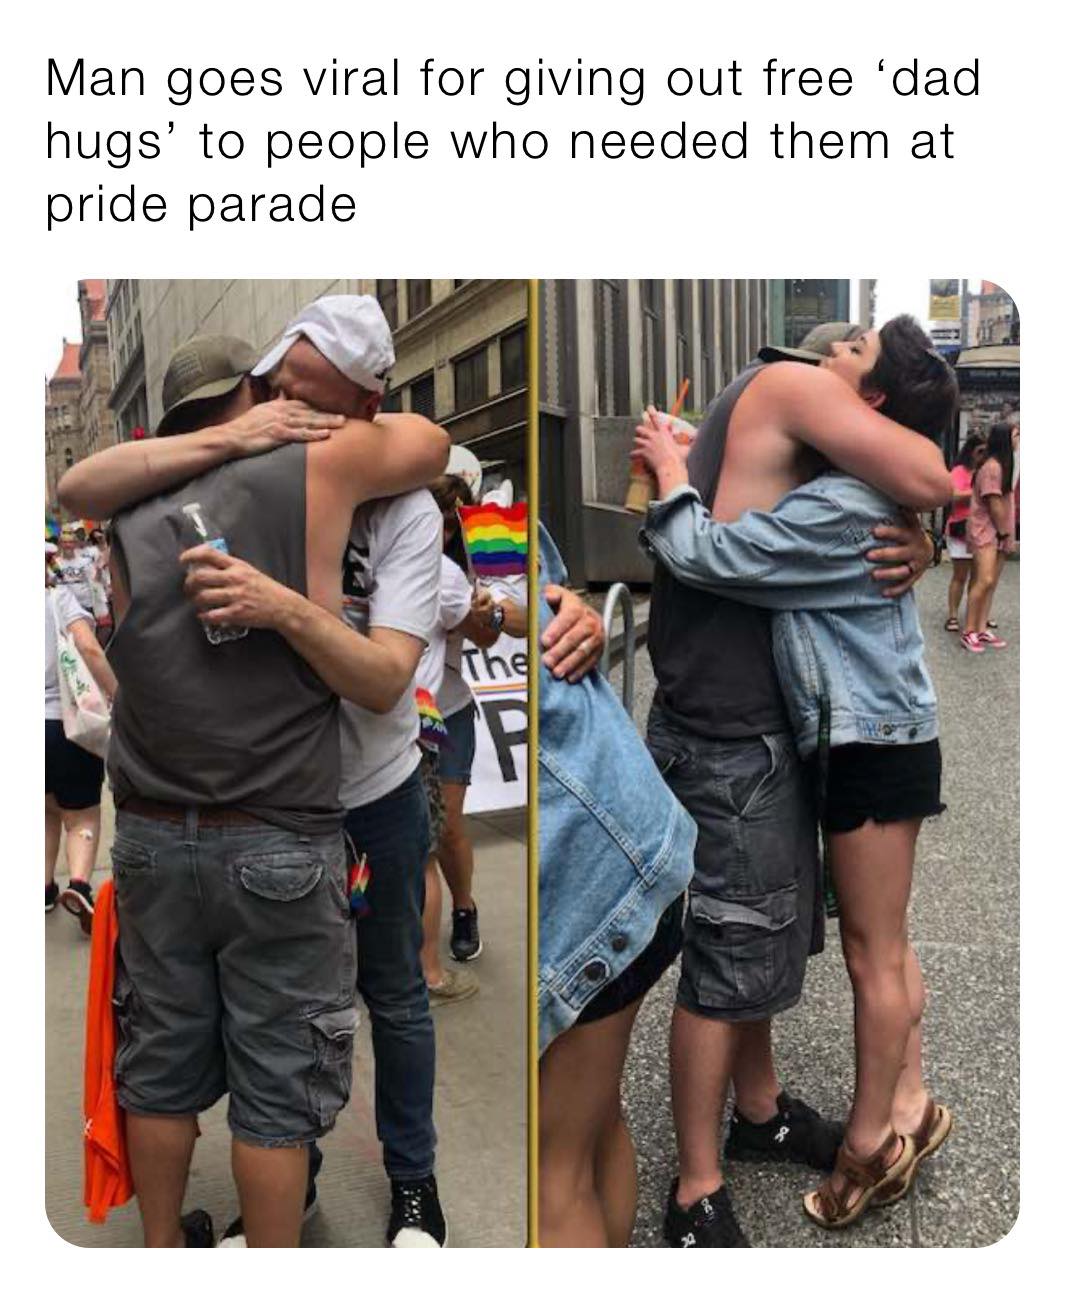 pride parade free dad hugs - Man goes viral for giving out free 'dad hugs' to people who needed them at pride parade The F